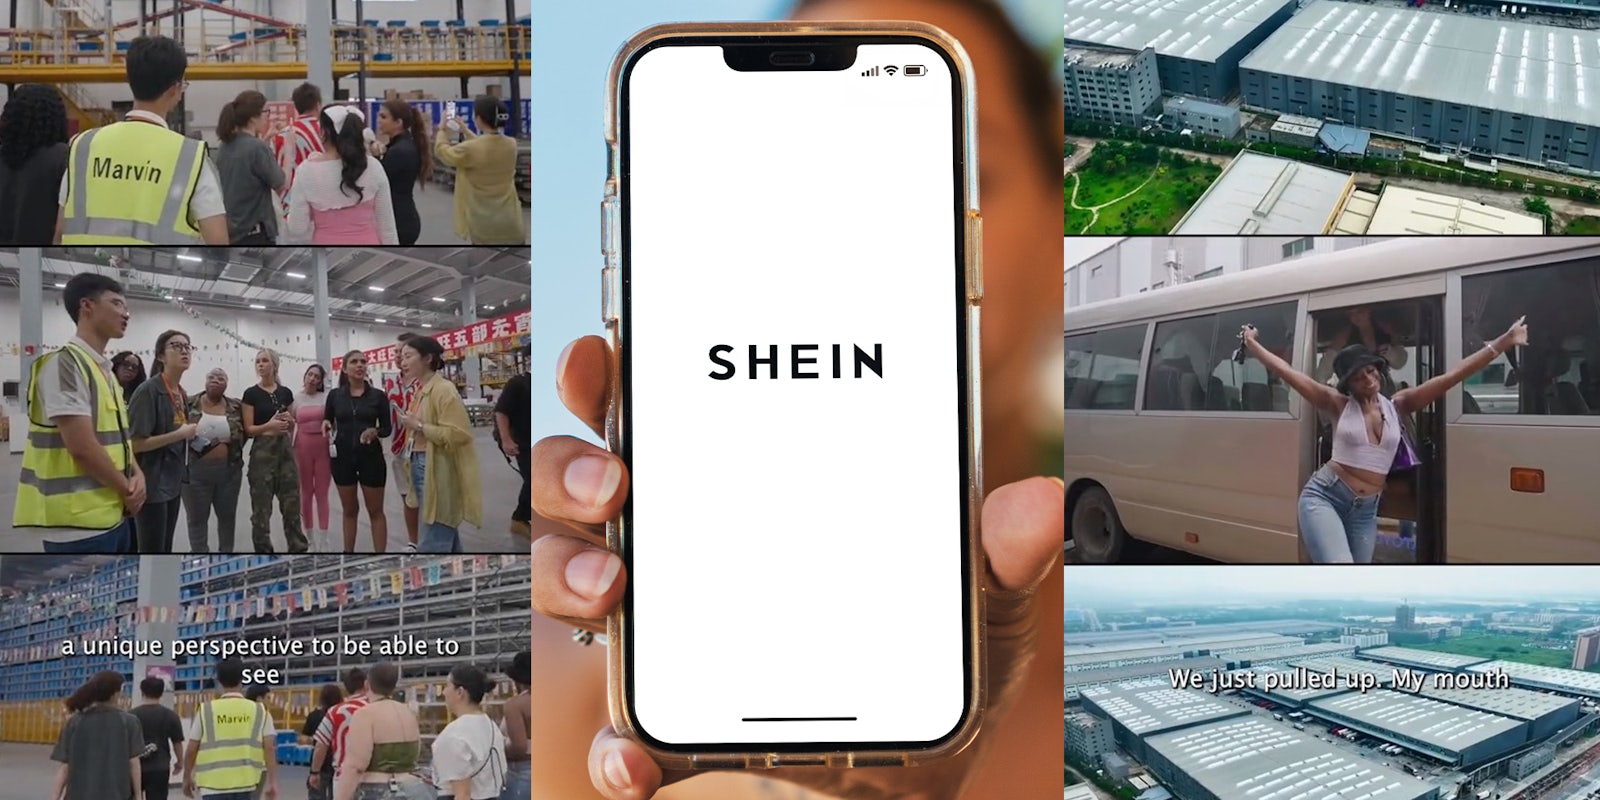 Influencers' sponsored trip to Shein factory criticized